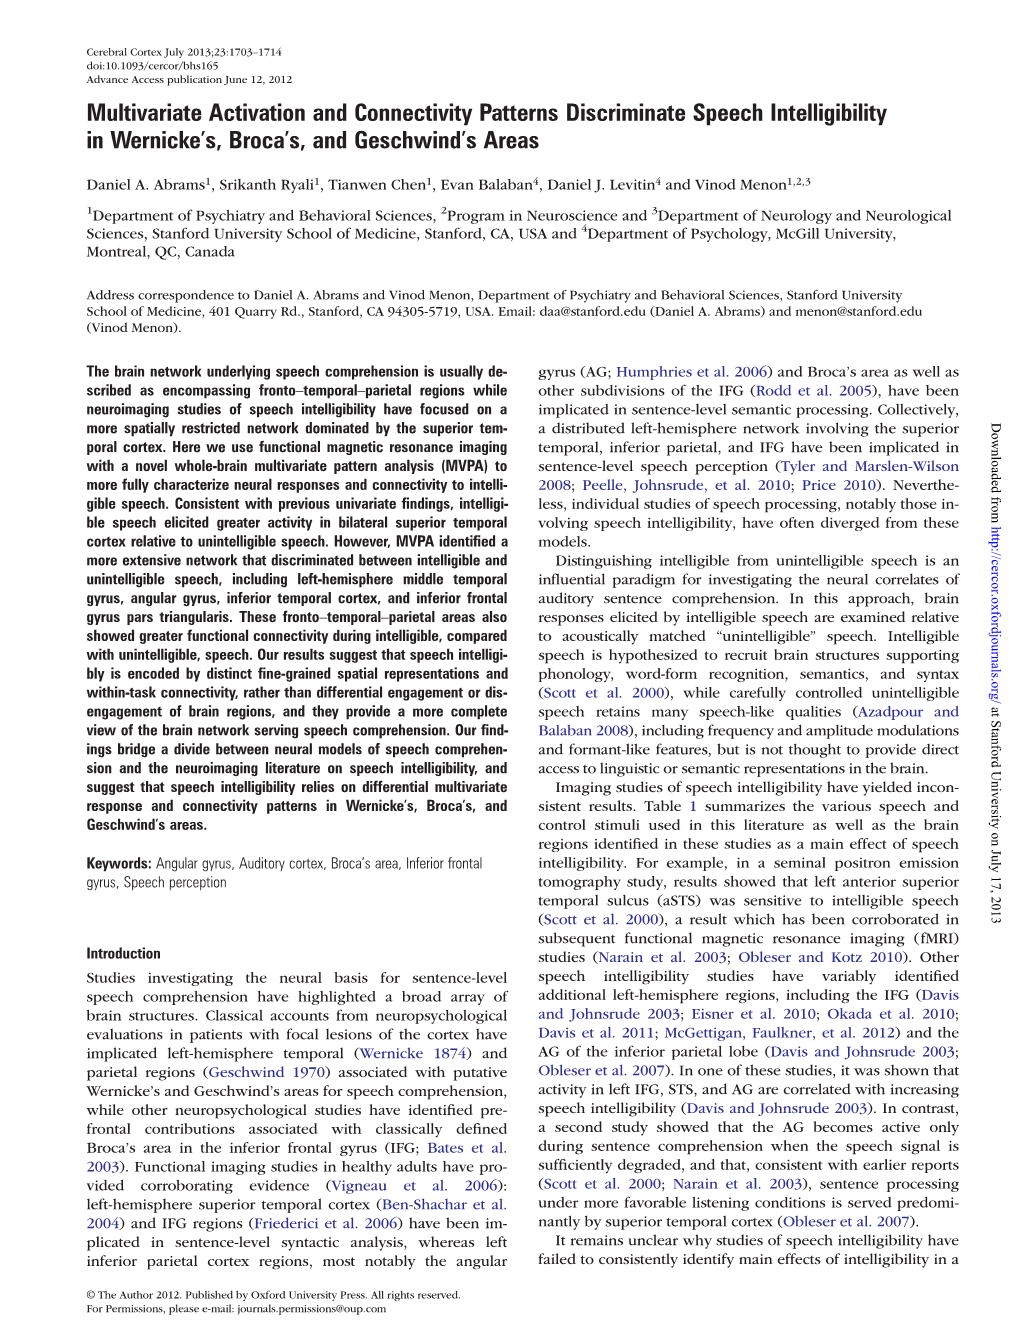 Multivariate Activation and Connectivity Patterns Discriminate Speech Intelligibility in Wernicke’S, Broca’S, and Geschwind’S Areas